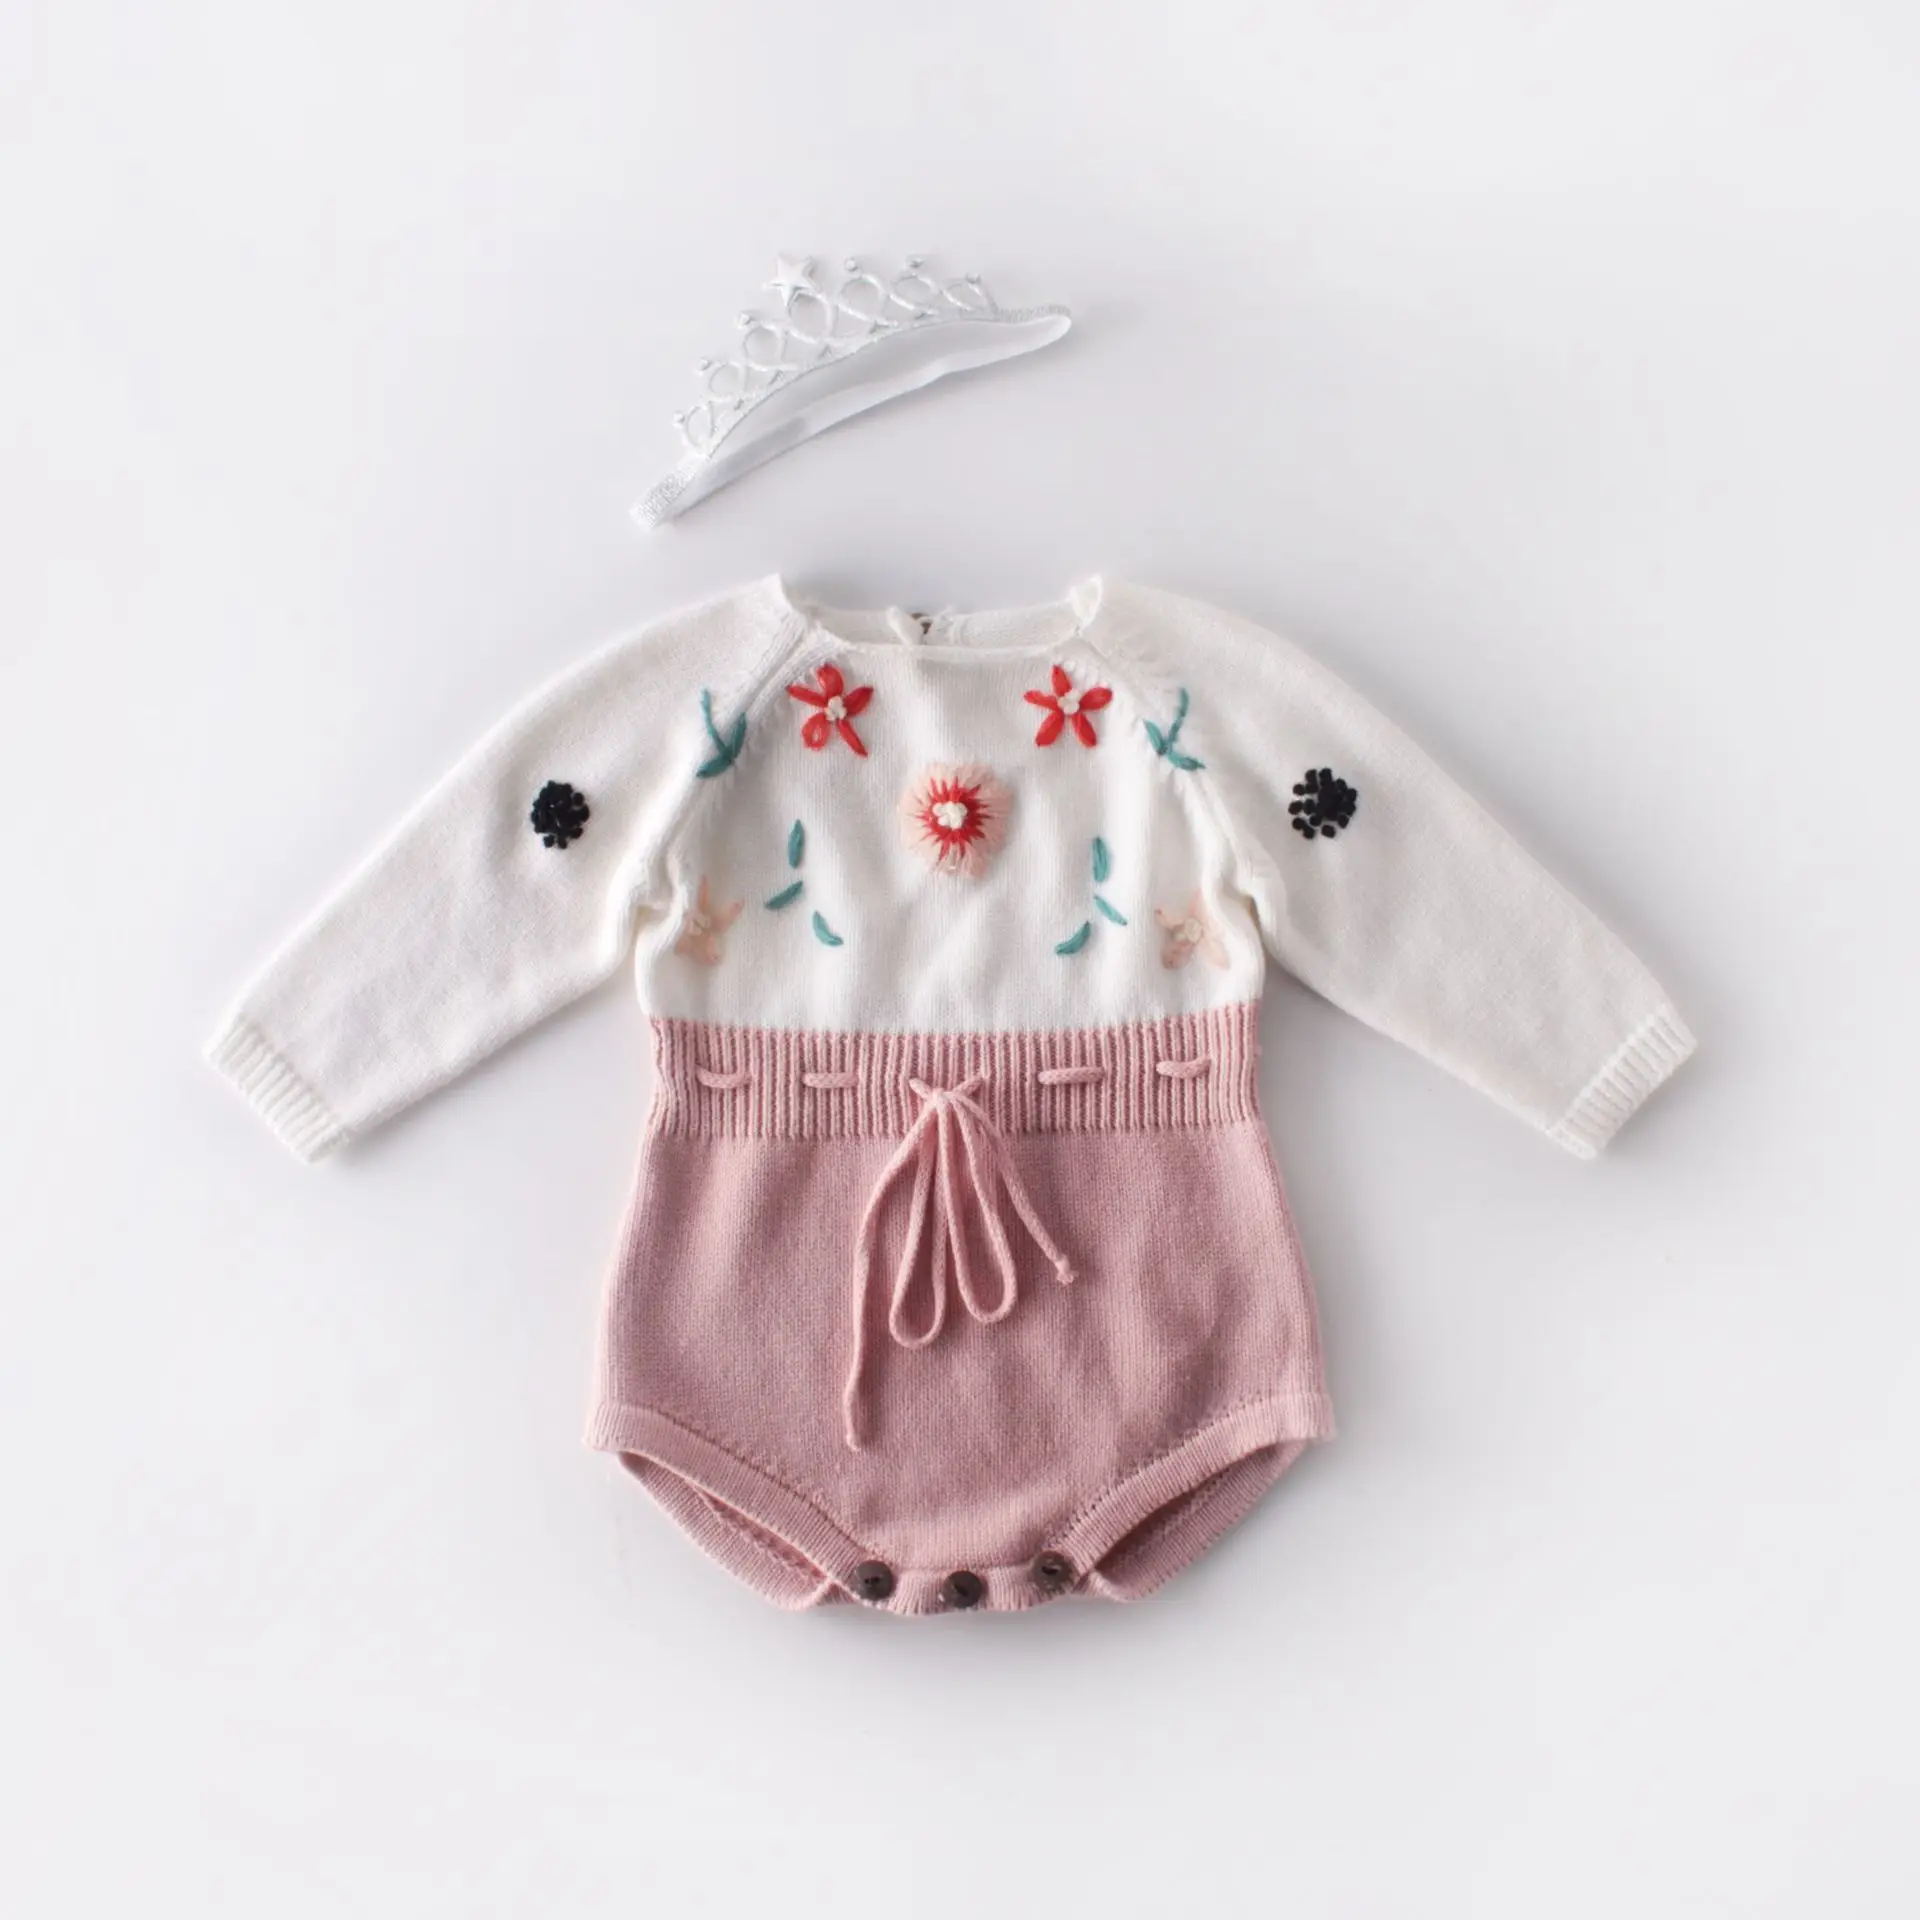 

2020 clothes for babies hand embroidered sweater knitting wool conjoined clothing bag used for travel fart ah climb clothes